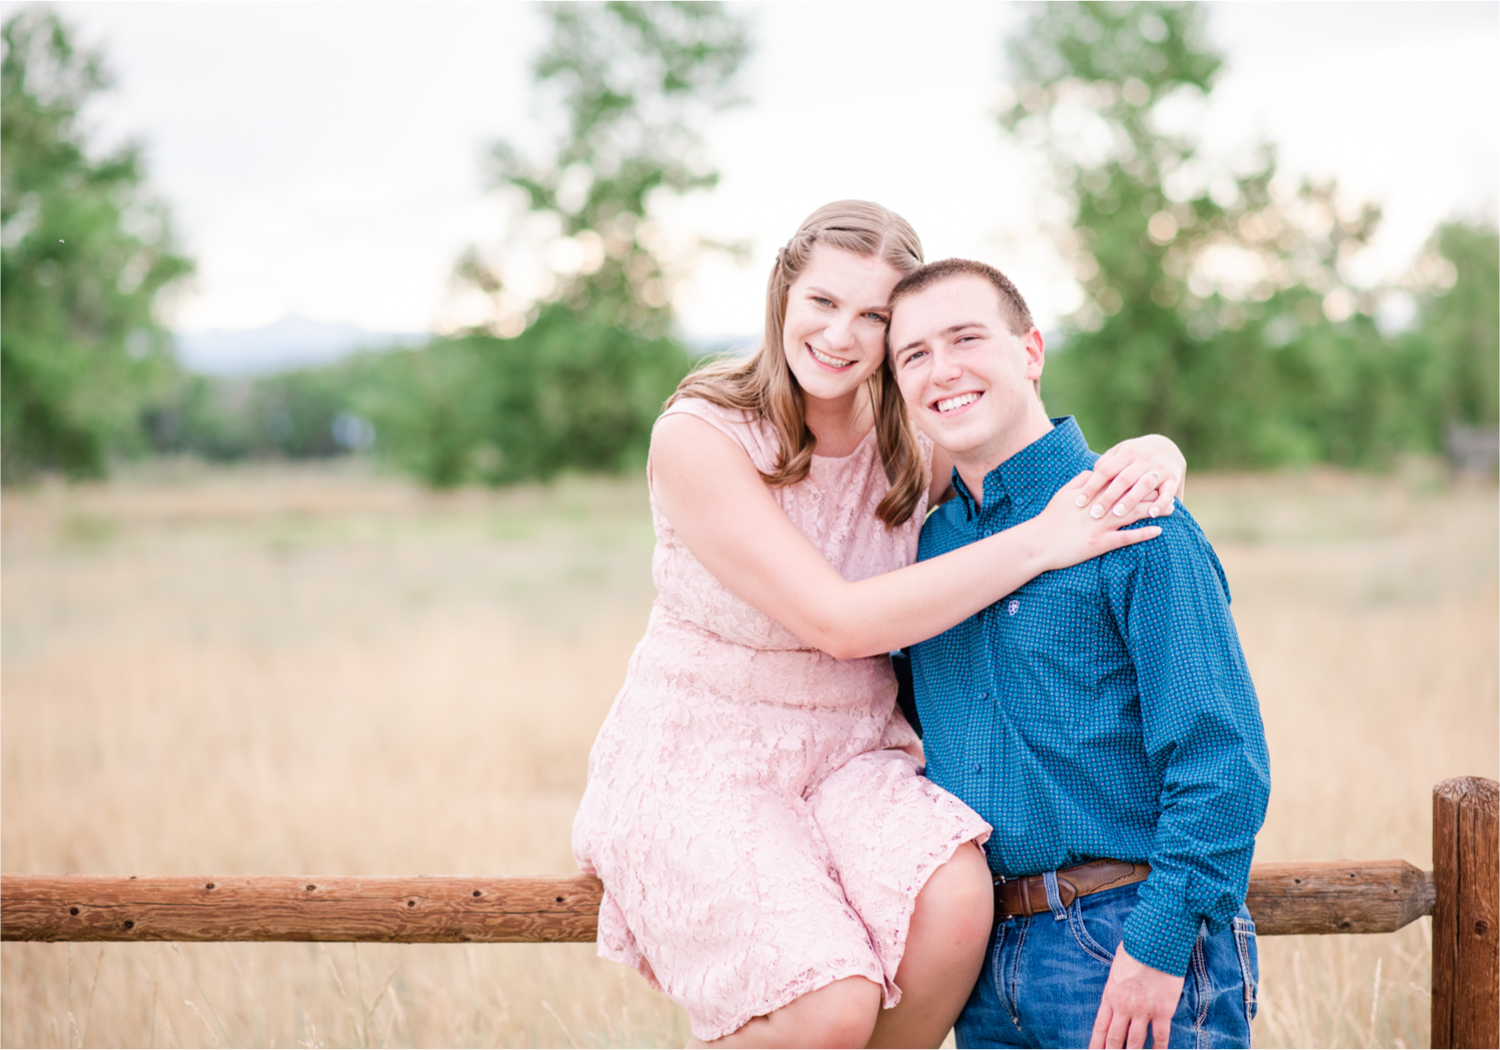 Summer Engagement Session at Sandstone Ranch in Longmont Colorado near Boulder | Britni Girard Photography | Country Engagement